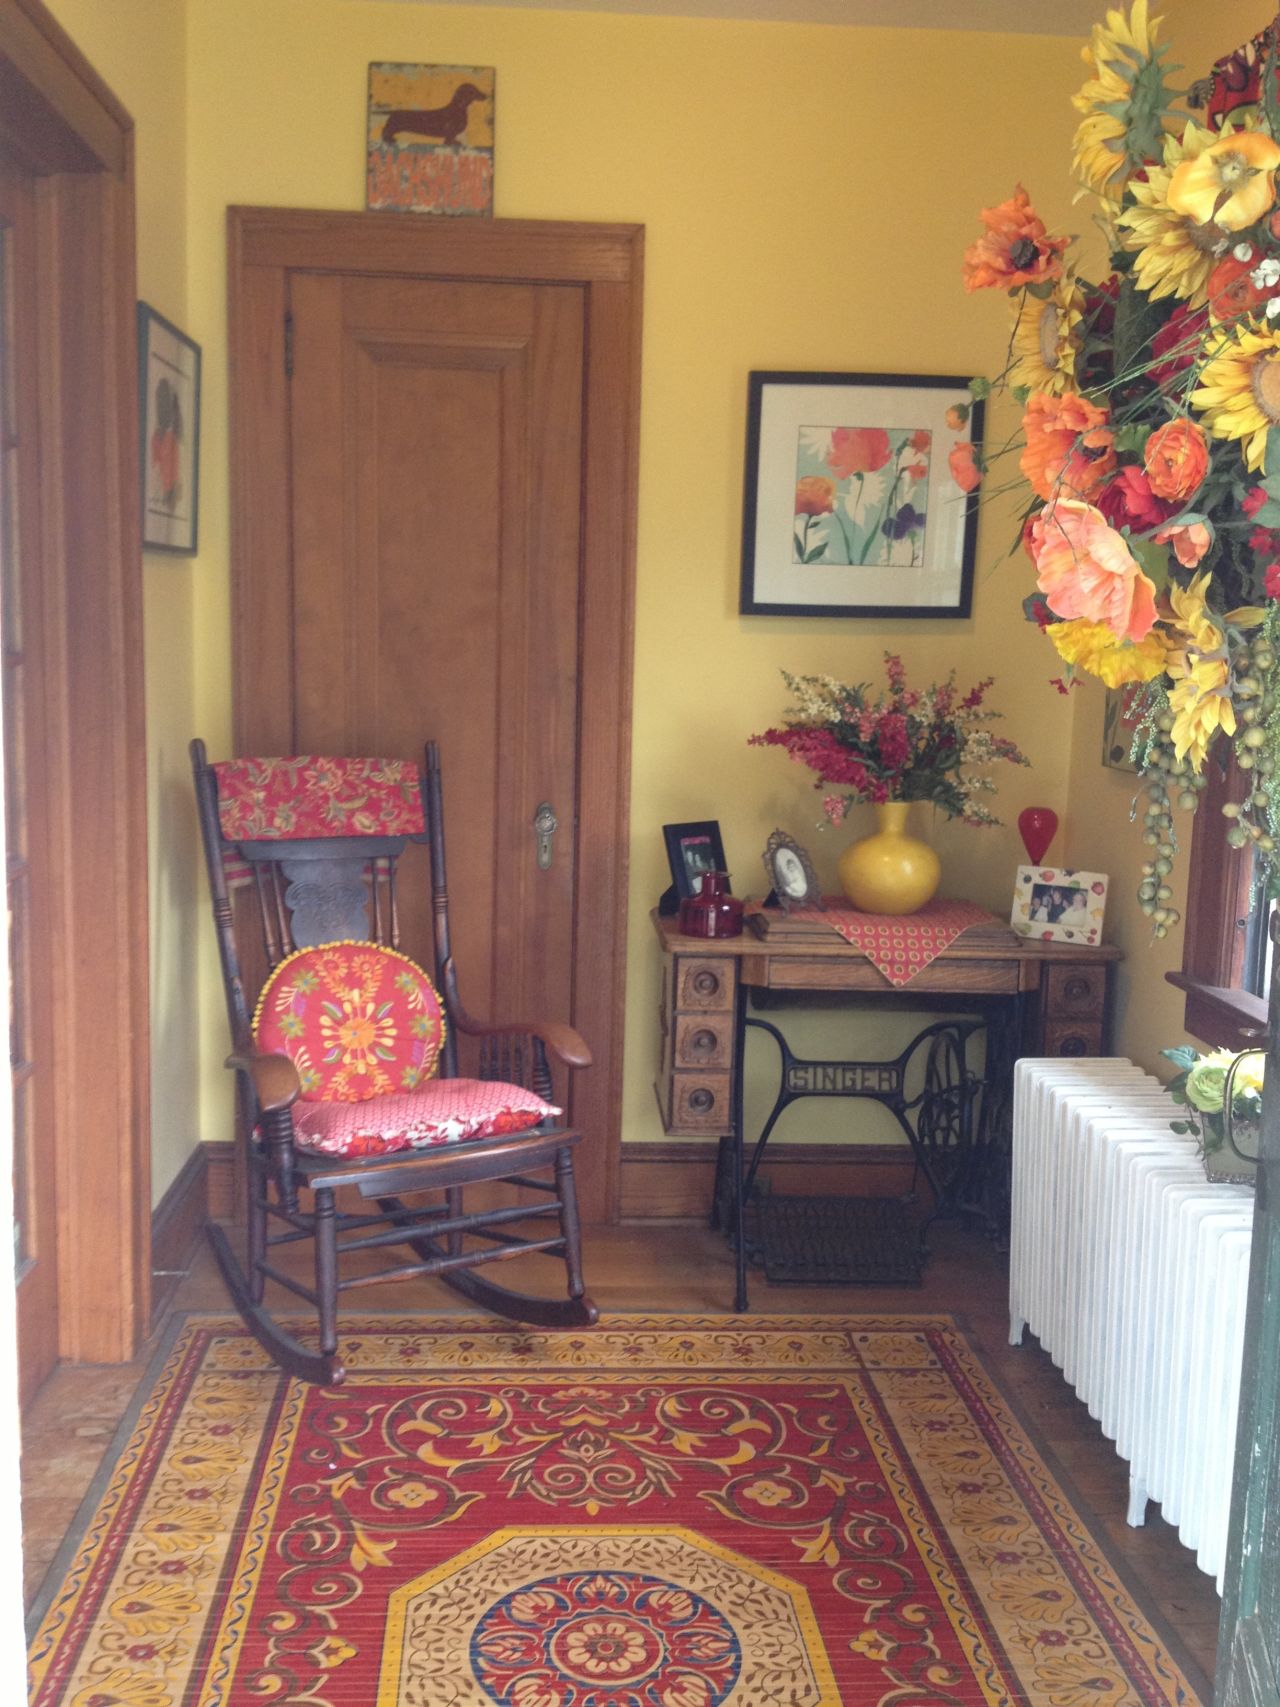 <a href="http://ireport.cnn.com/docs/DOC-988433">Jill Deane</a>'s "vibrant-eclectic" style continues from her front porch into the foyer of her 1920s home.